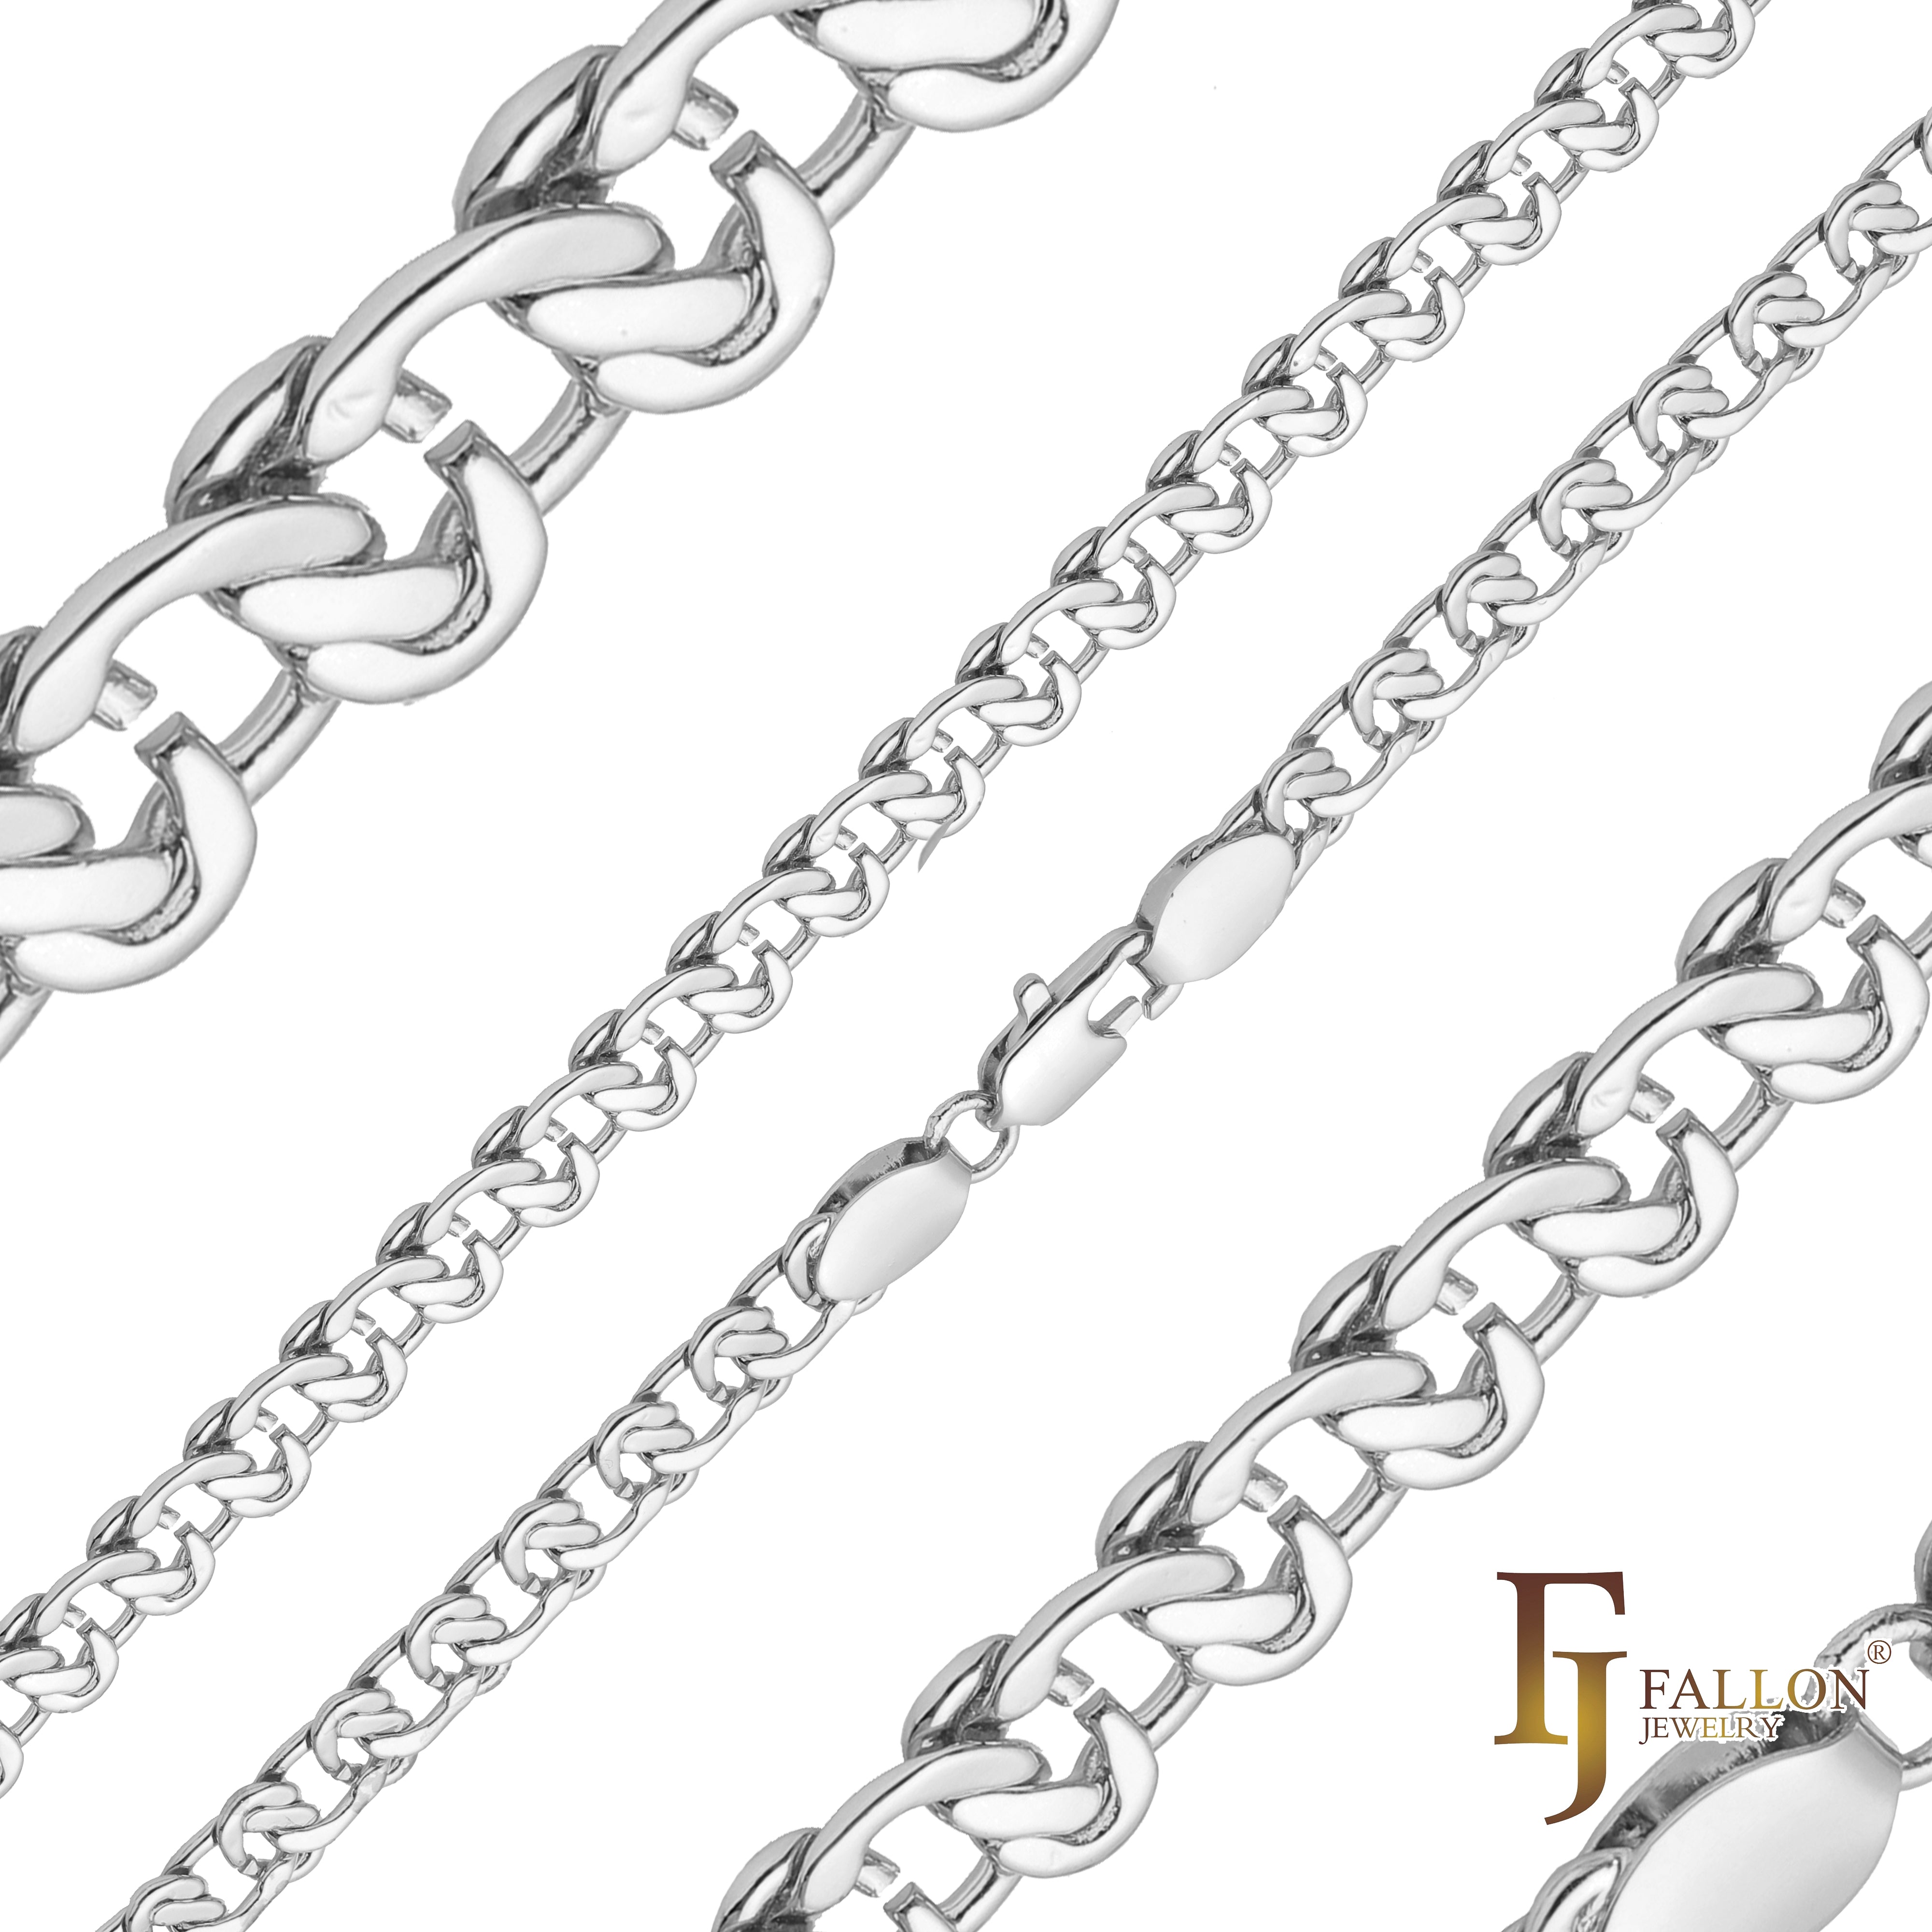 .Cable Snail link chains plated in 14K Gold, Rose Gold, White Gold